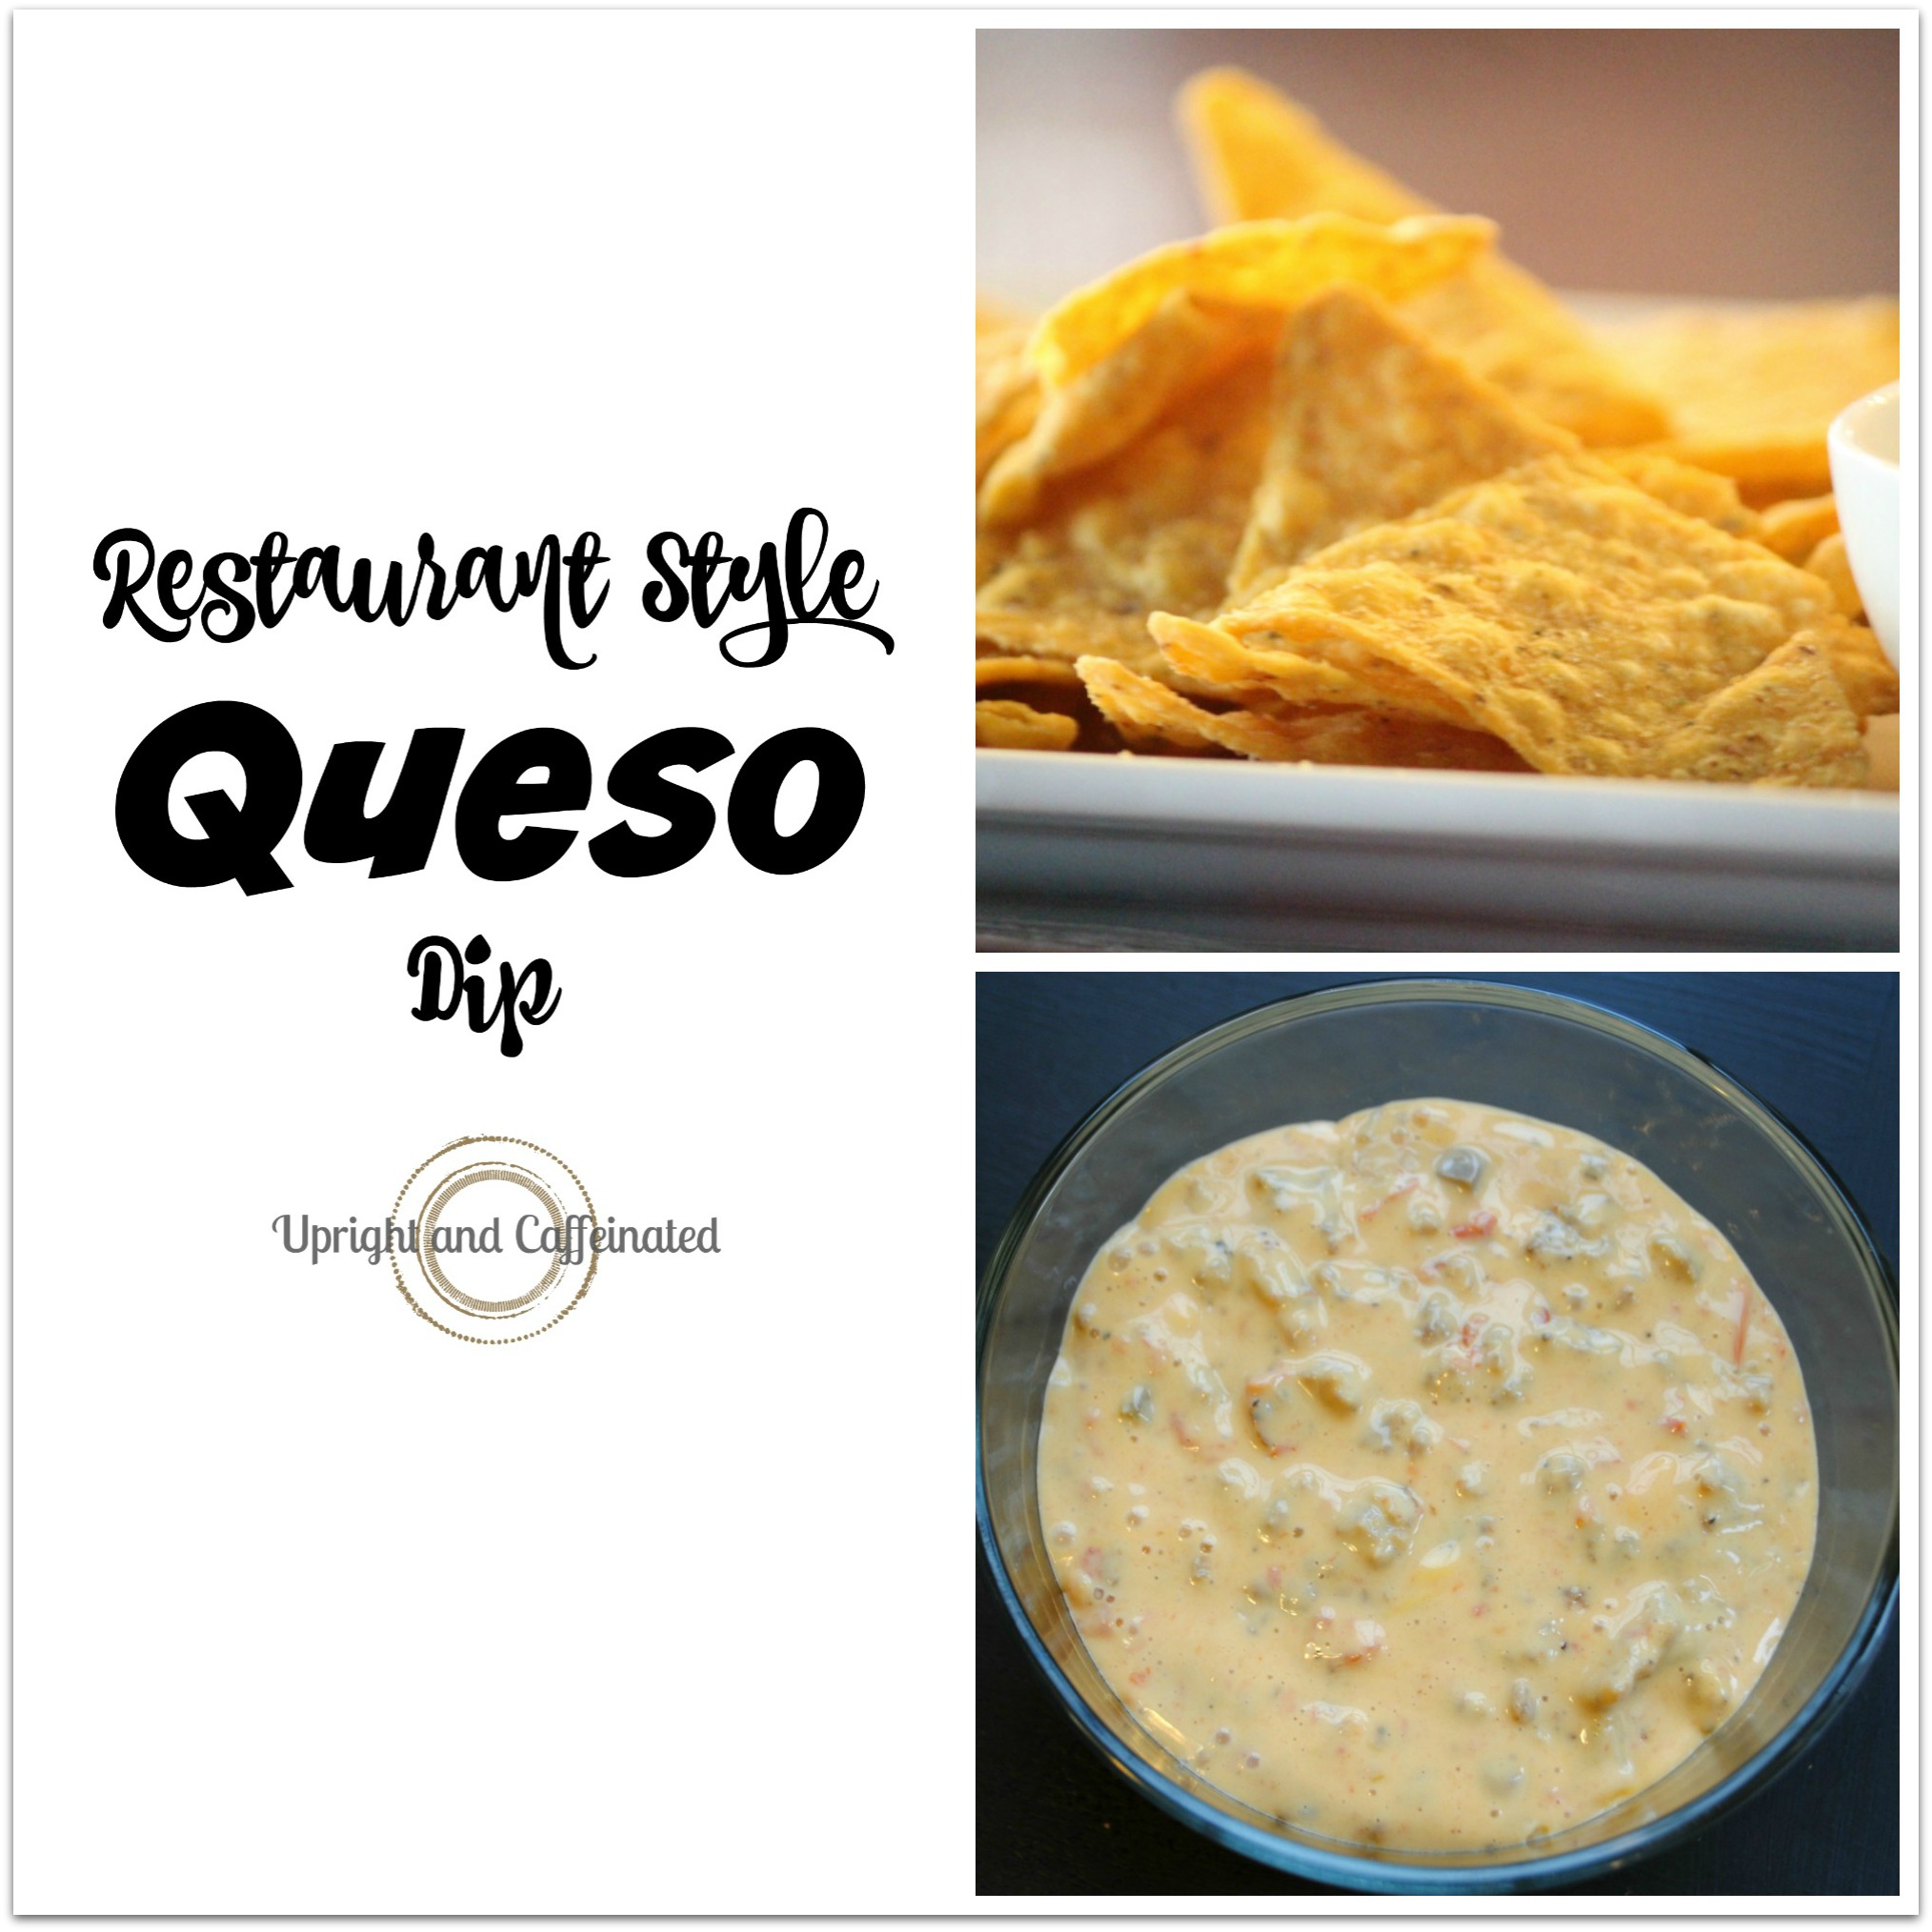 This queso dip recipe is the best on Pinterest!!